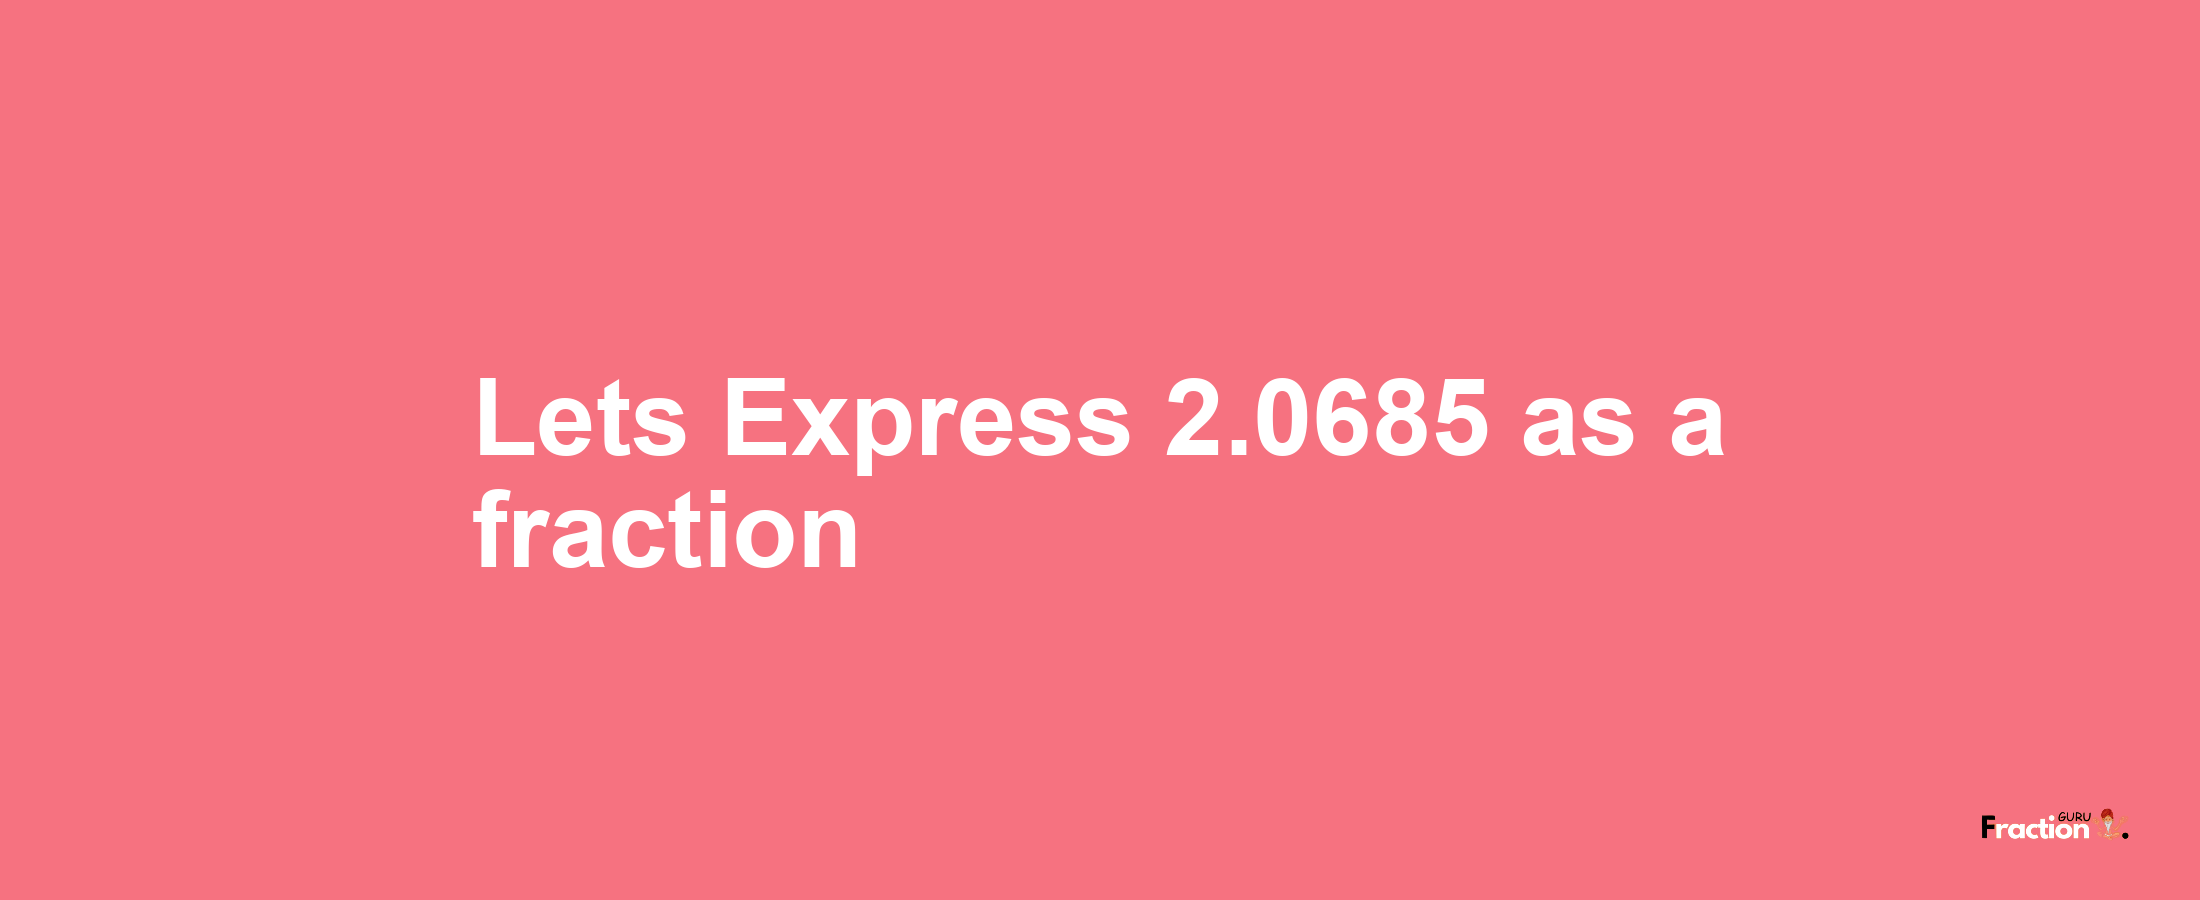 Lets Express 2.0685 as afraction